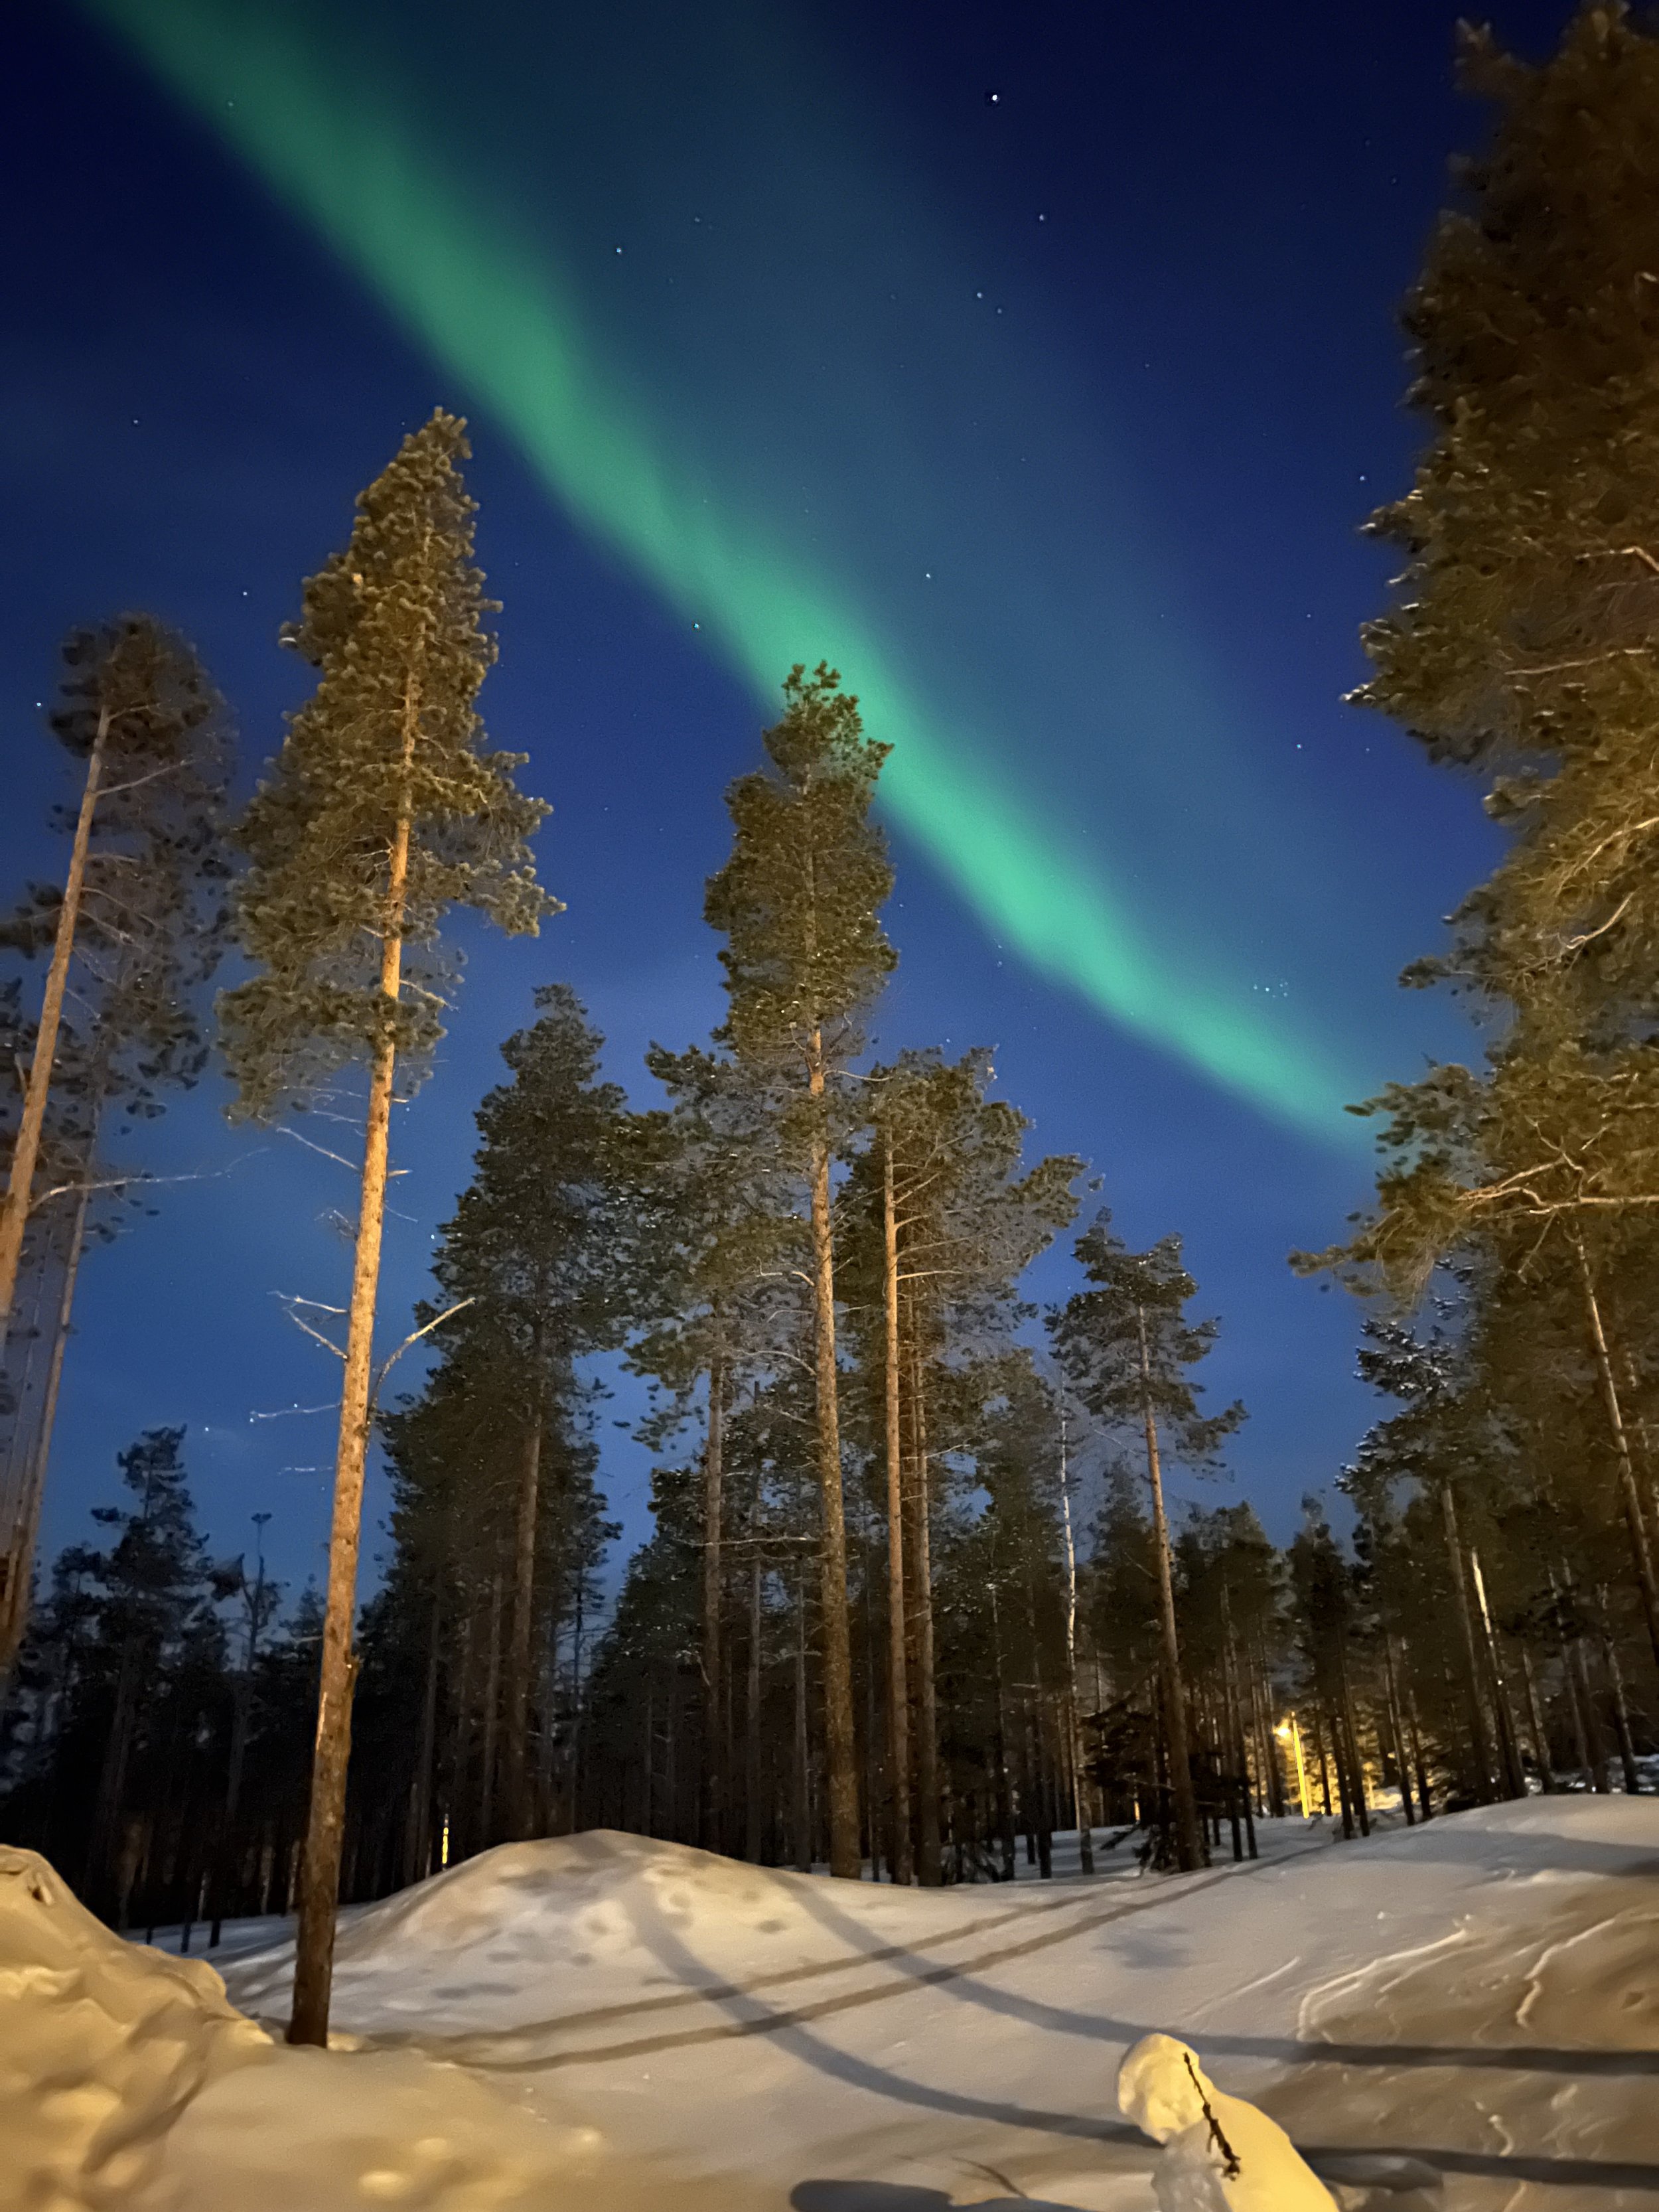  The aurora on my first night in Finland, during an almost full moon 